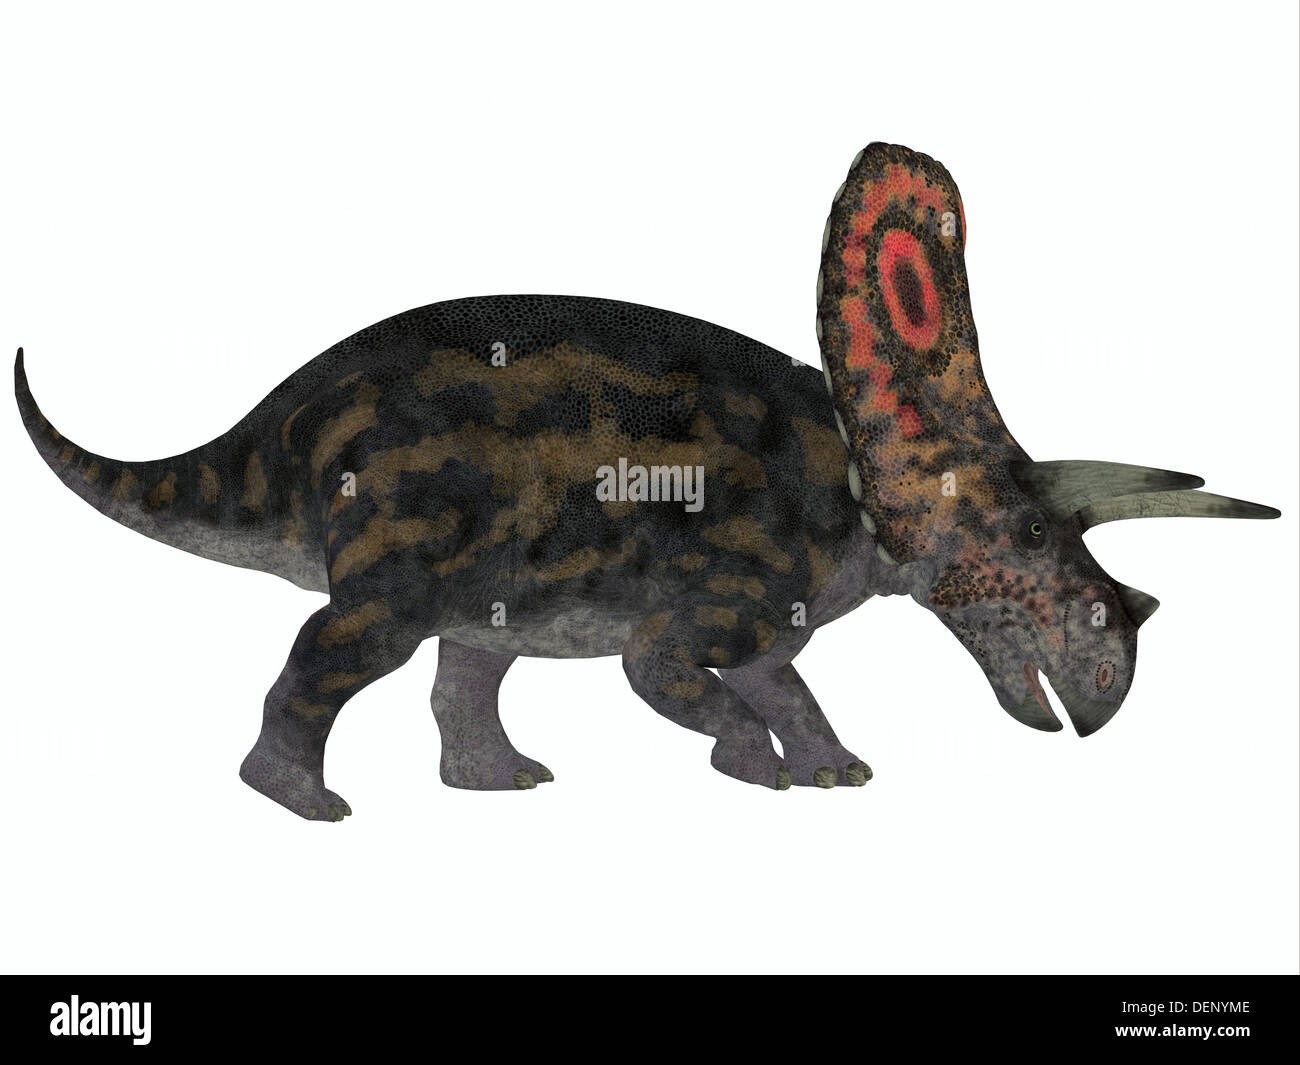 Torosaurus had the largest skulls of any known land animal. It was herbivorous dinosaur from the Late Cretaceous period. Stock Photo